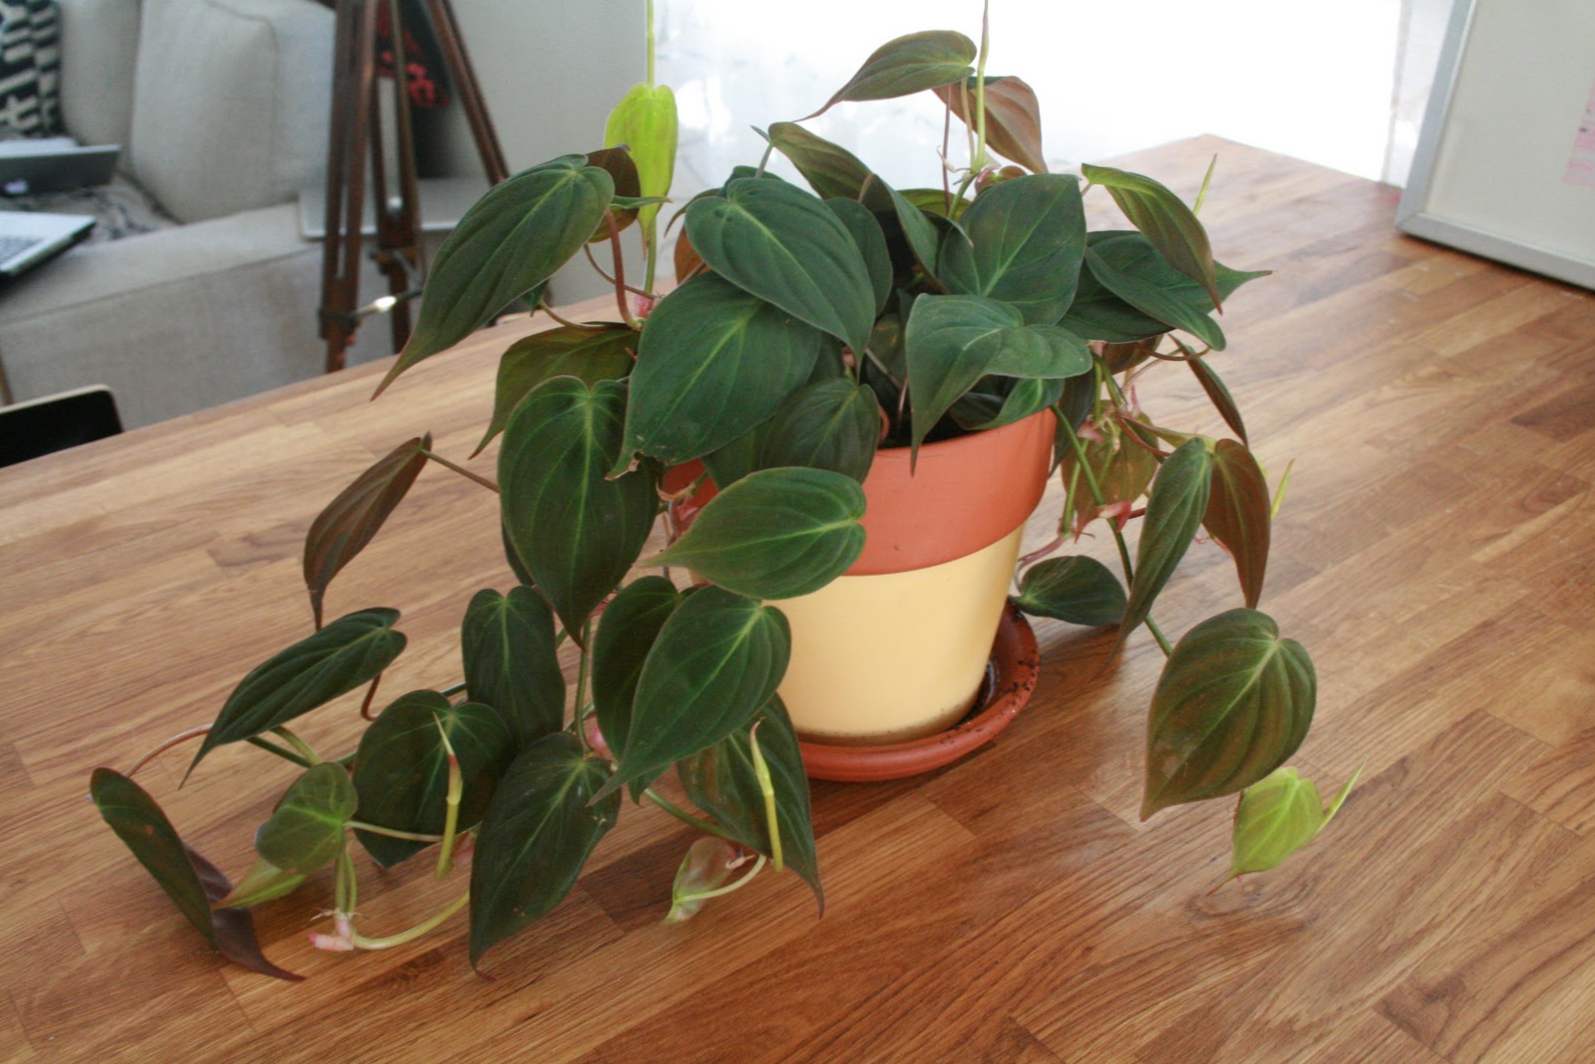 Philodendron (Philodendron) vrste, opis, oskrba doma